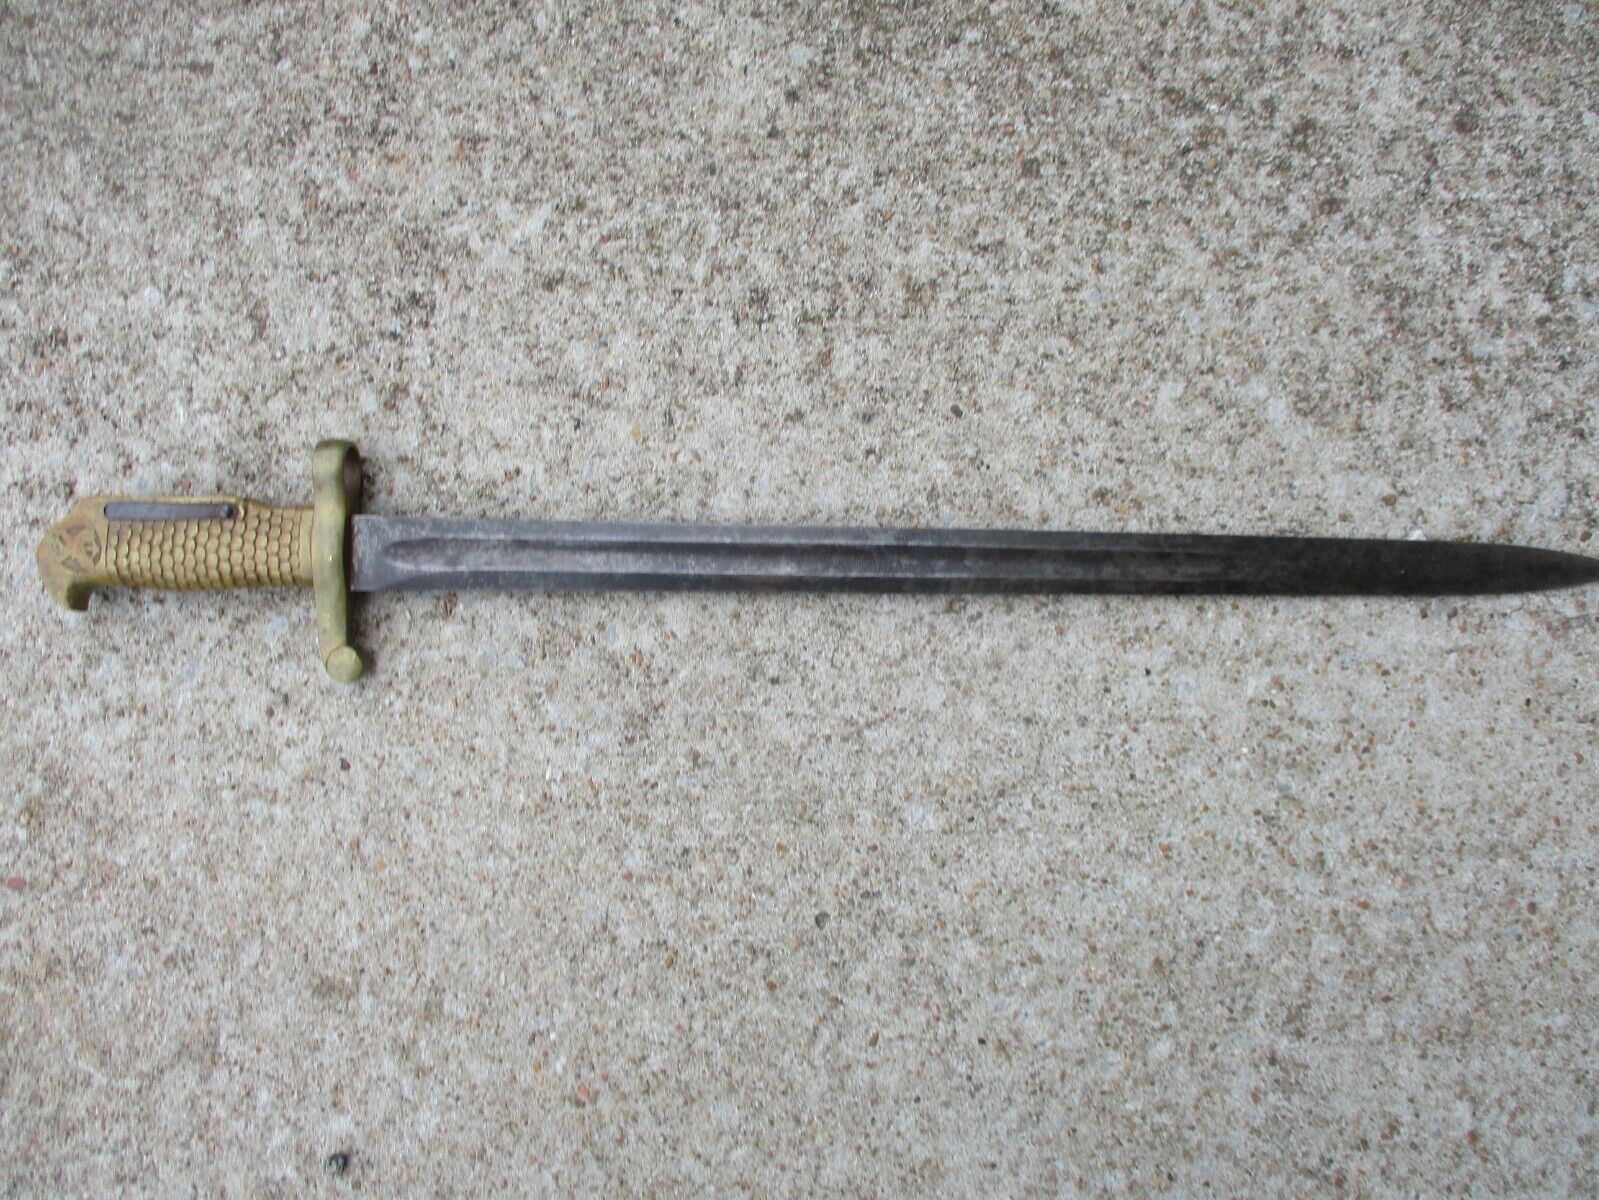 US Indian War Period Navy Rifle Model 1870 Bayonet Manufactured by Ames